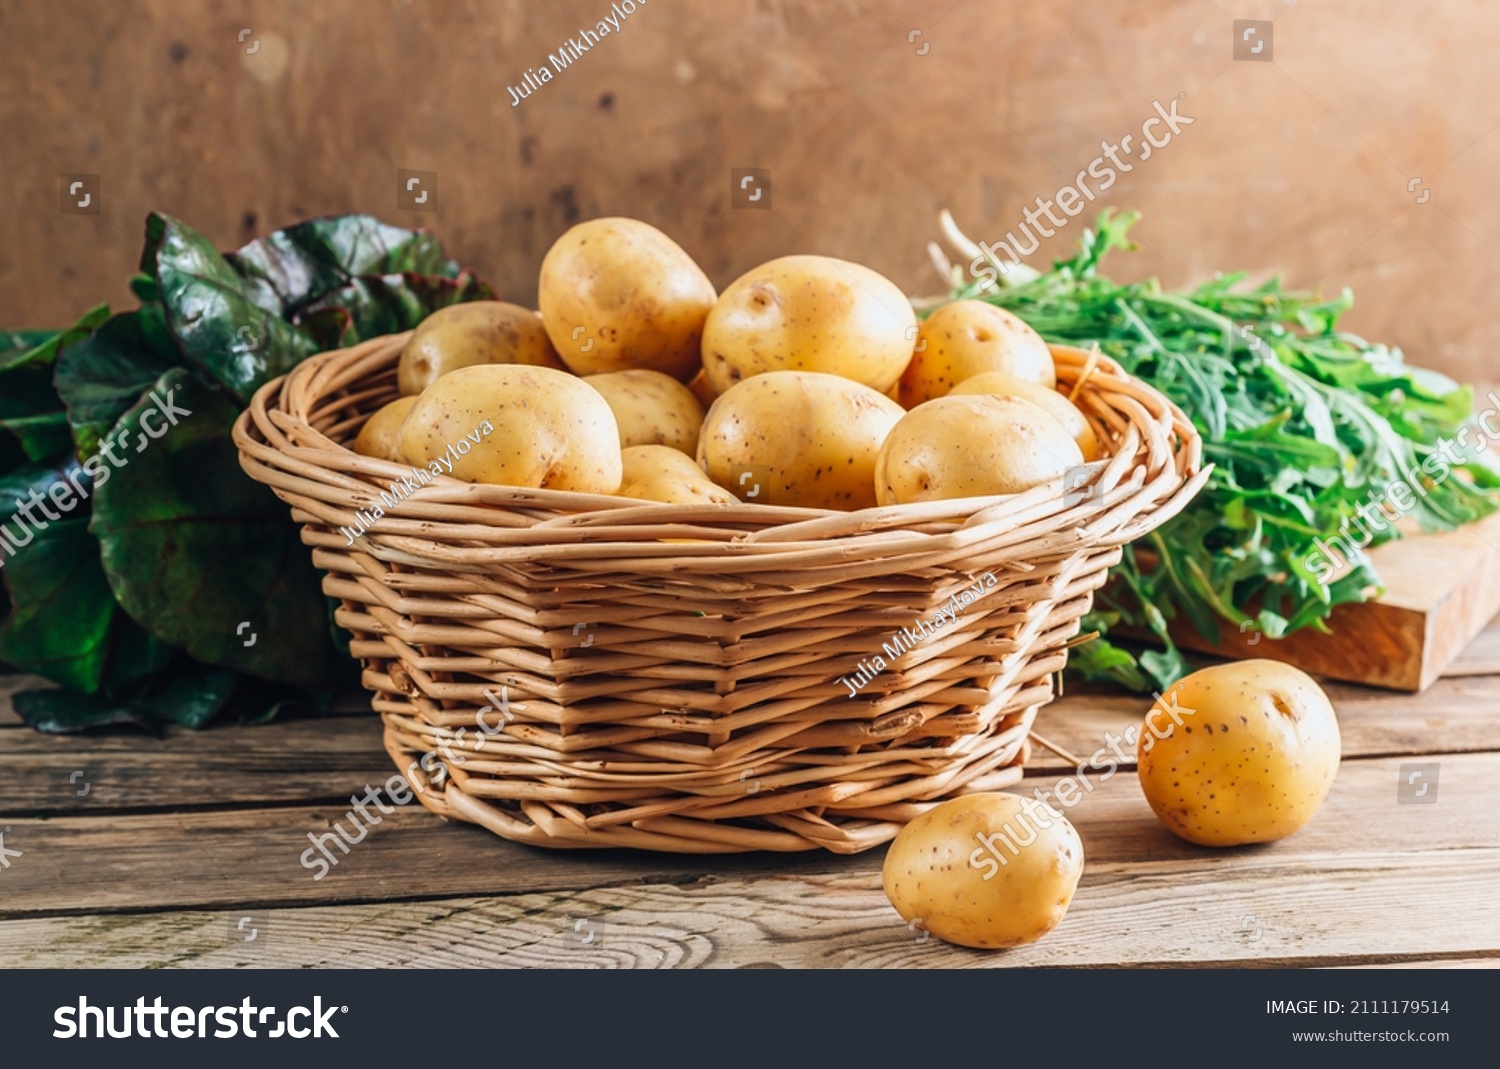 Fresh raw baby potato in a basket over wooden background. #2111179514